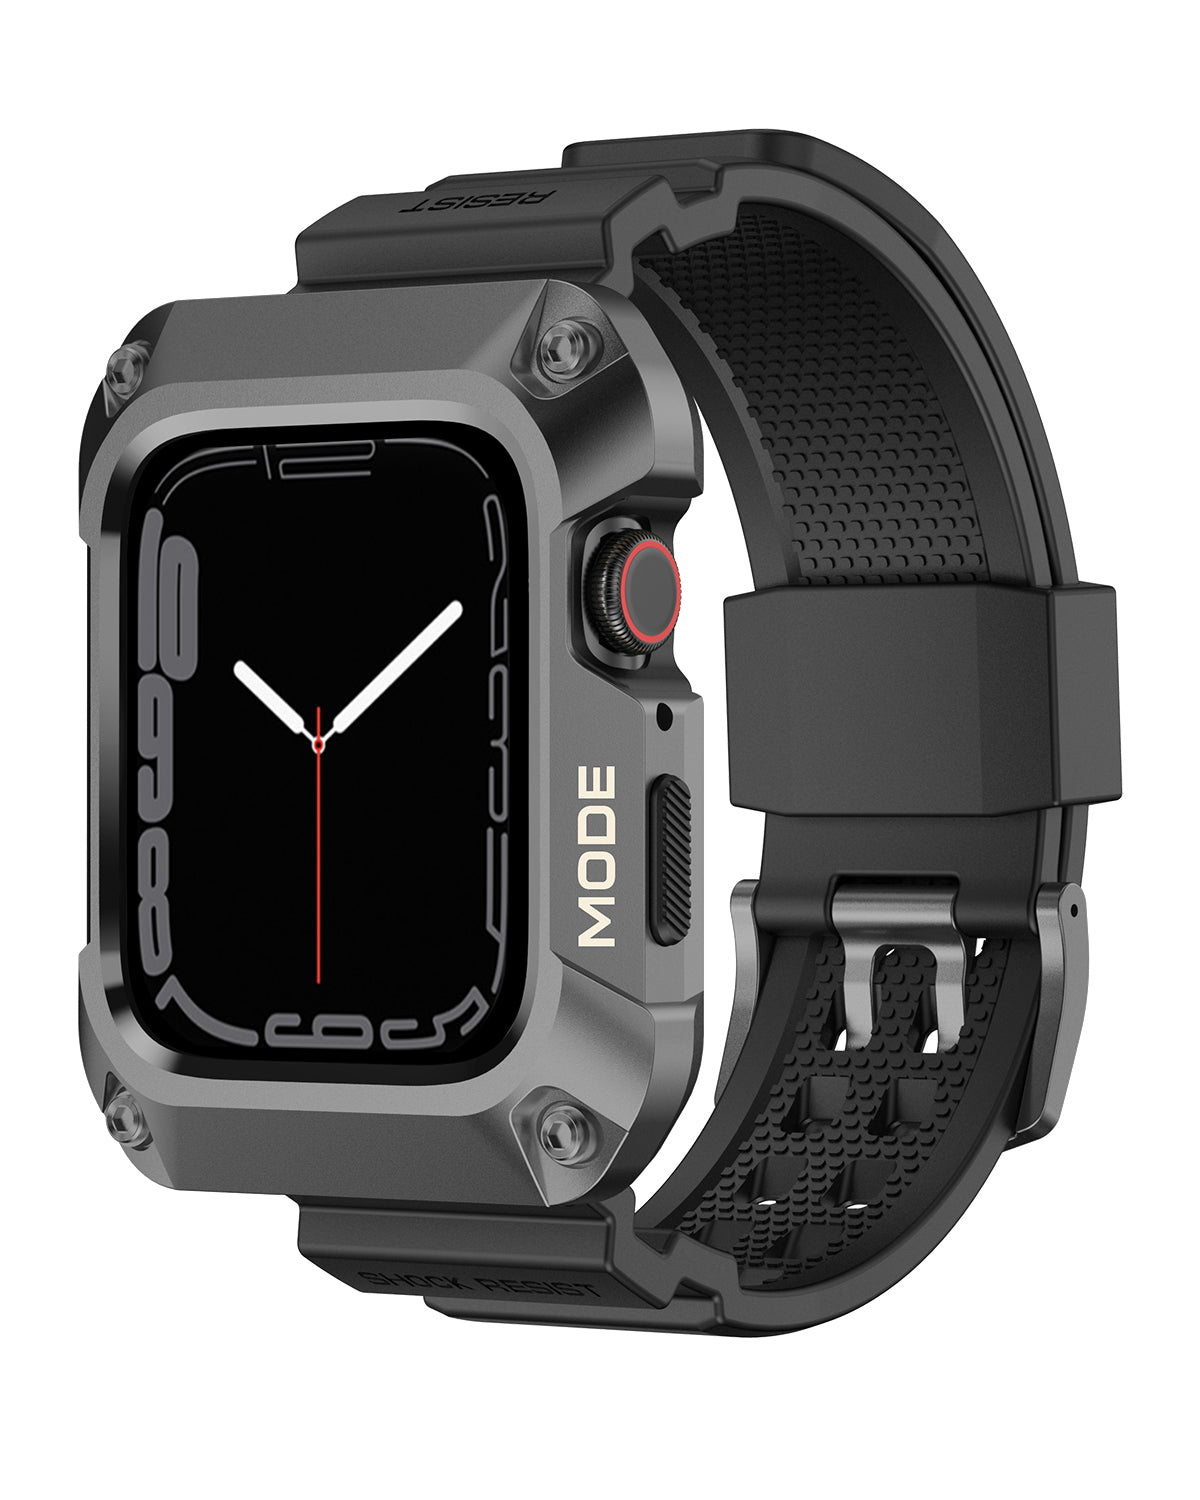 Apple Watch Rugged Metal Case with TPU Strap